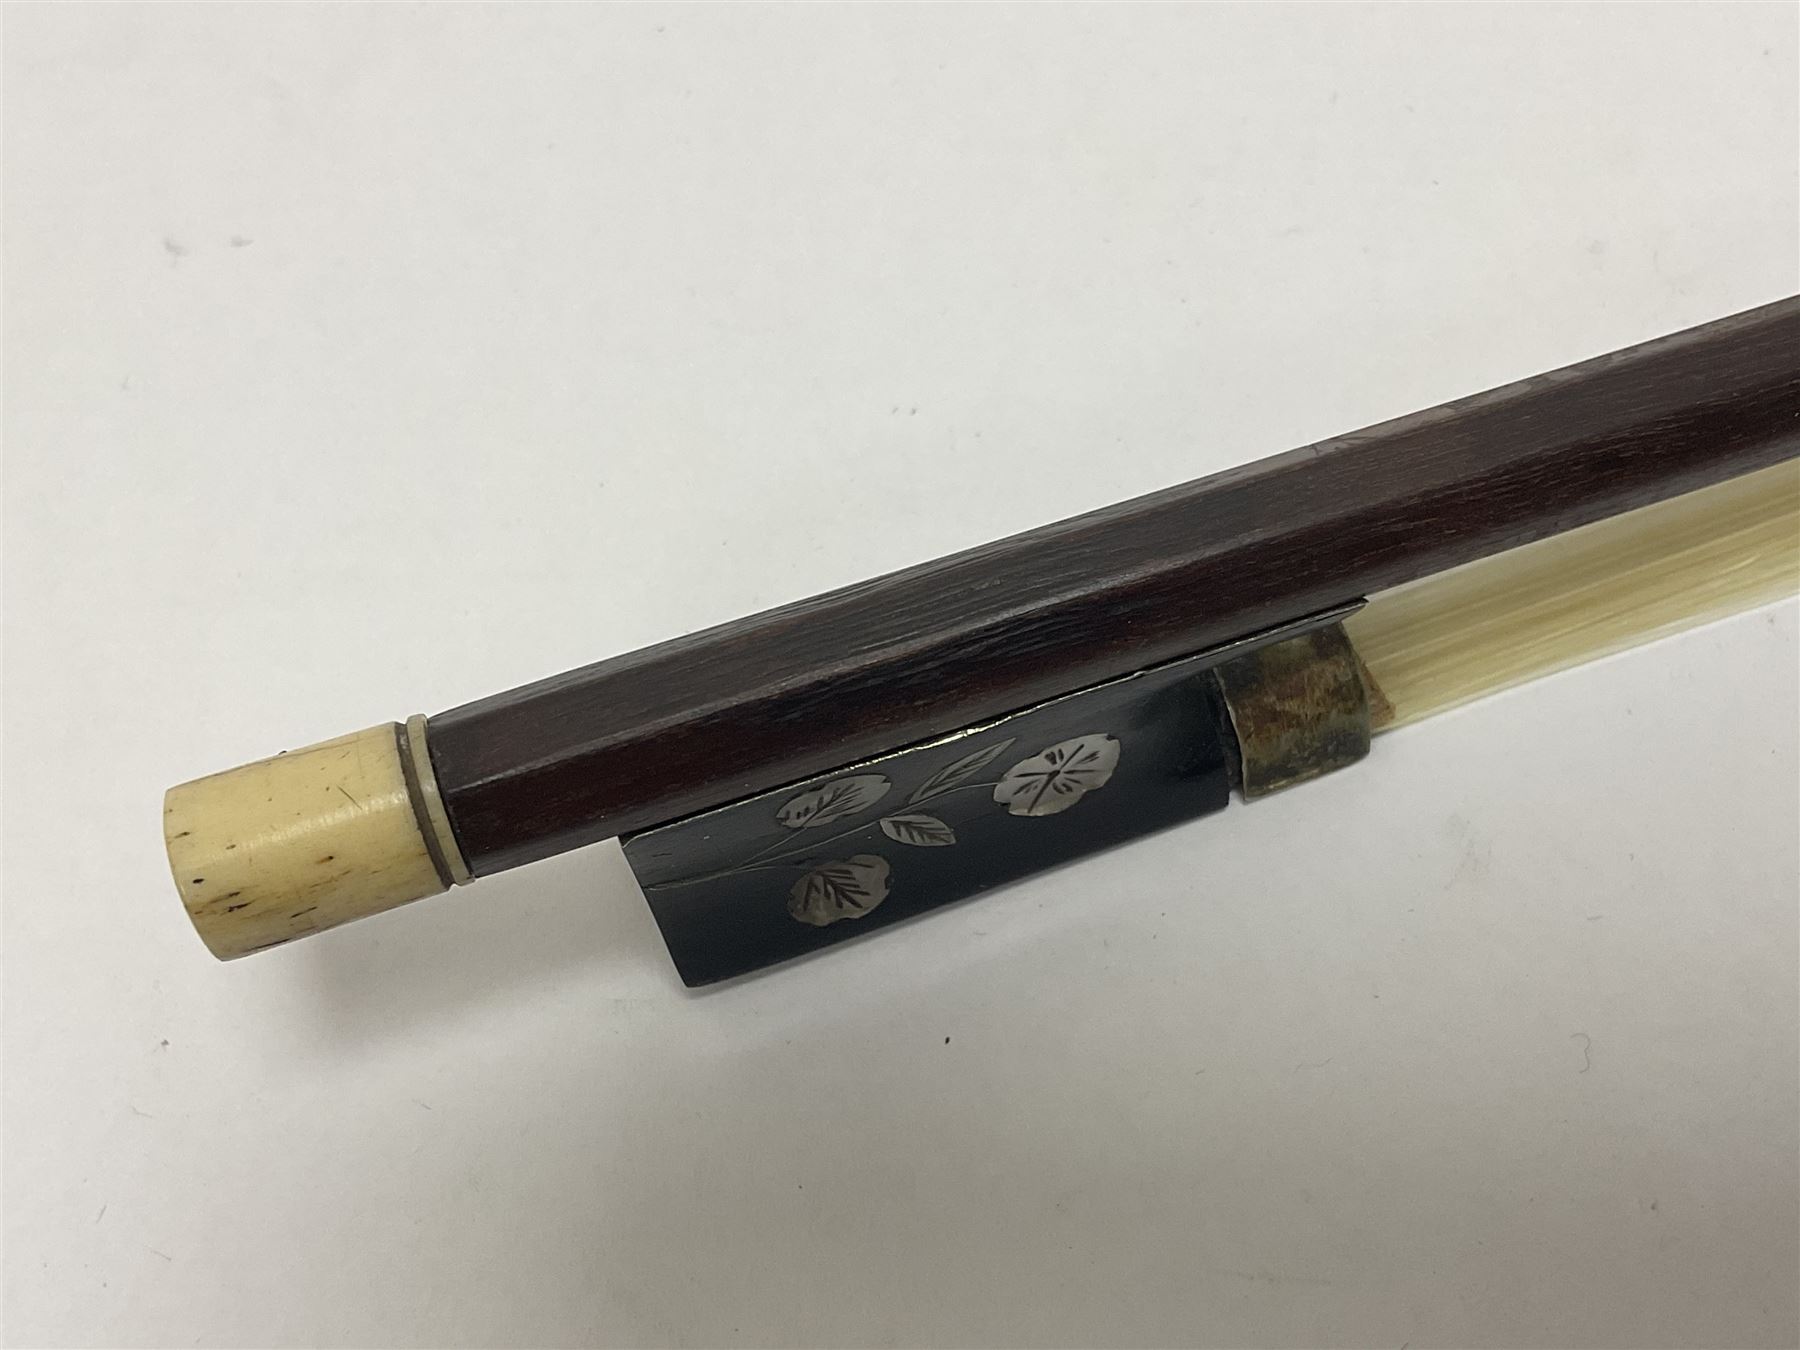 19th century wooden violin bow with a decorative mother of pearl inlay depicting flowers to the frog - Image 6 of 13